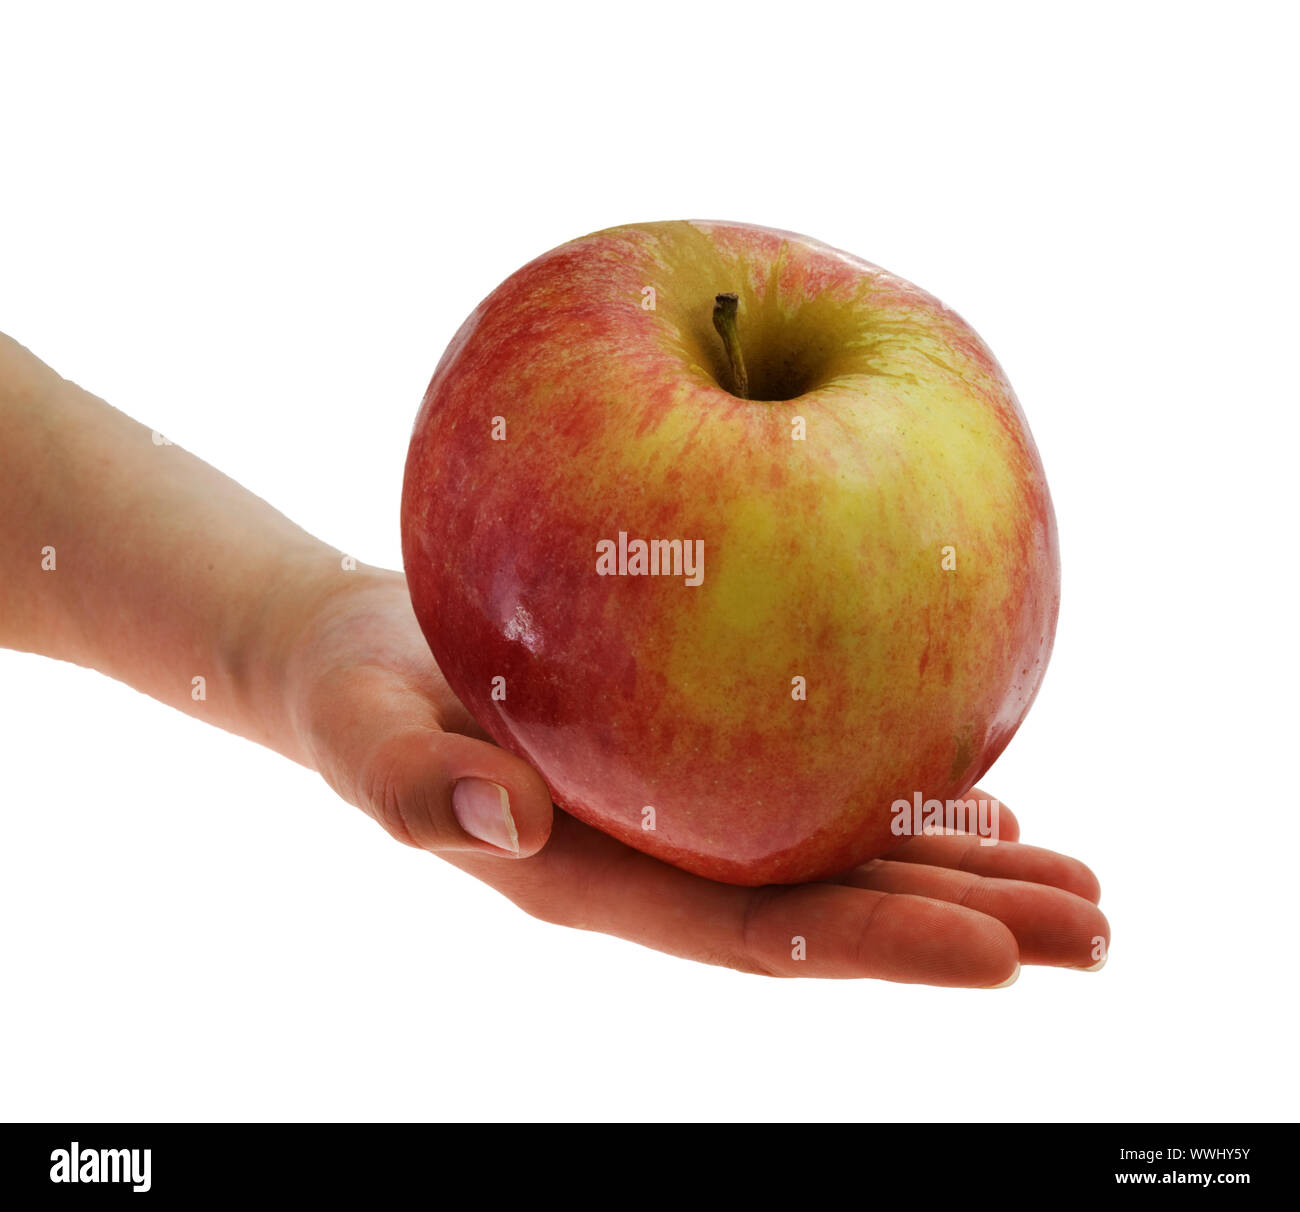 Hand holding big red with yellow sidewise an apple on a white background Stock Photo